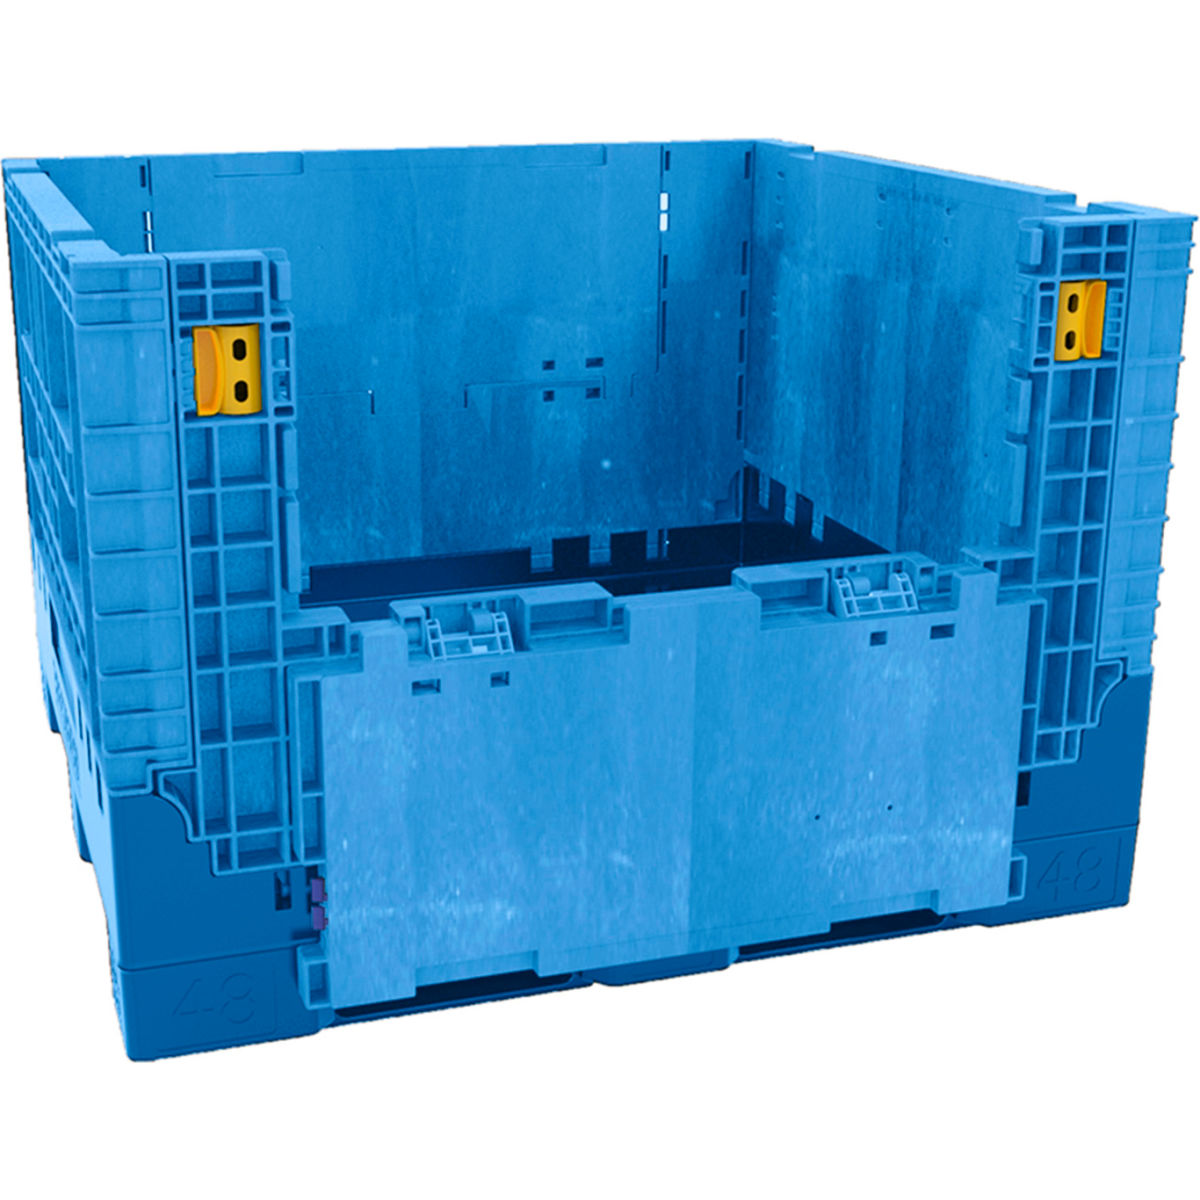 Picture of Akro-Mils 1358718 2500 lbs Buckhorn BN4845342023000 Folding Bulk Container - Blue - 48 x 45 x 34 in.